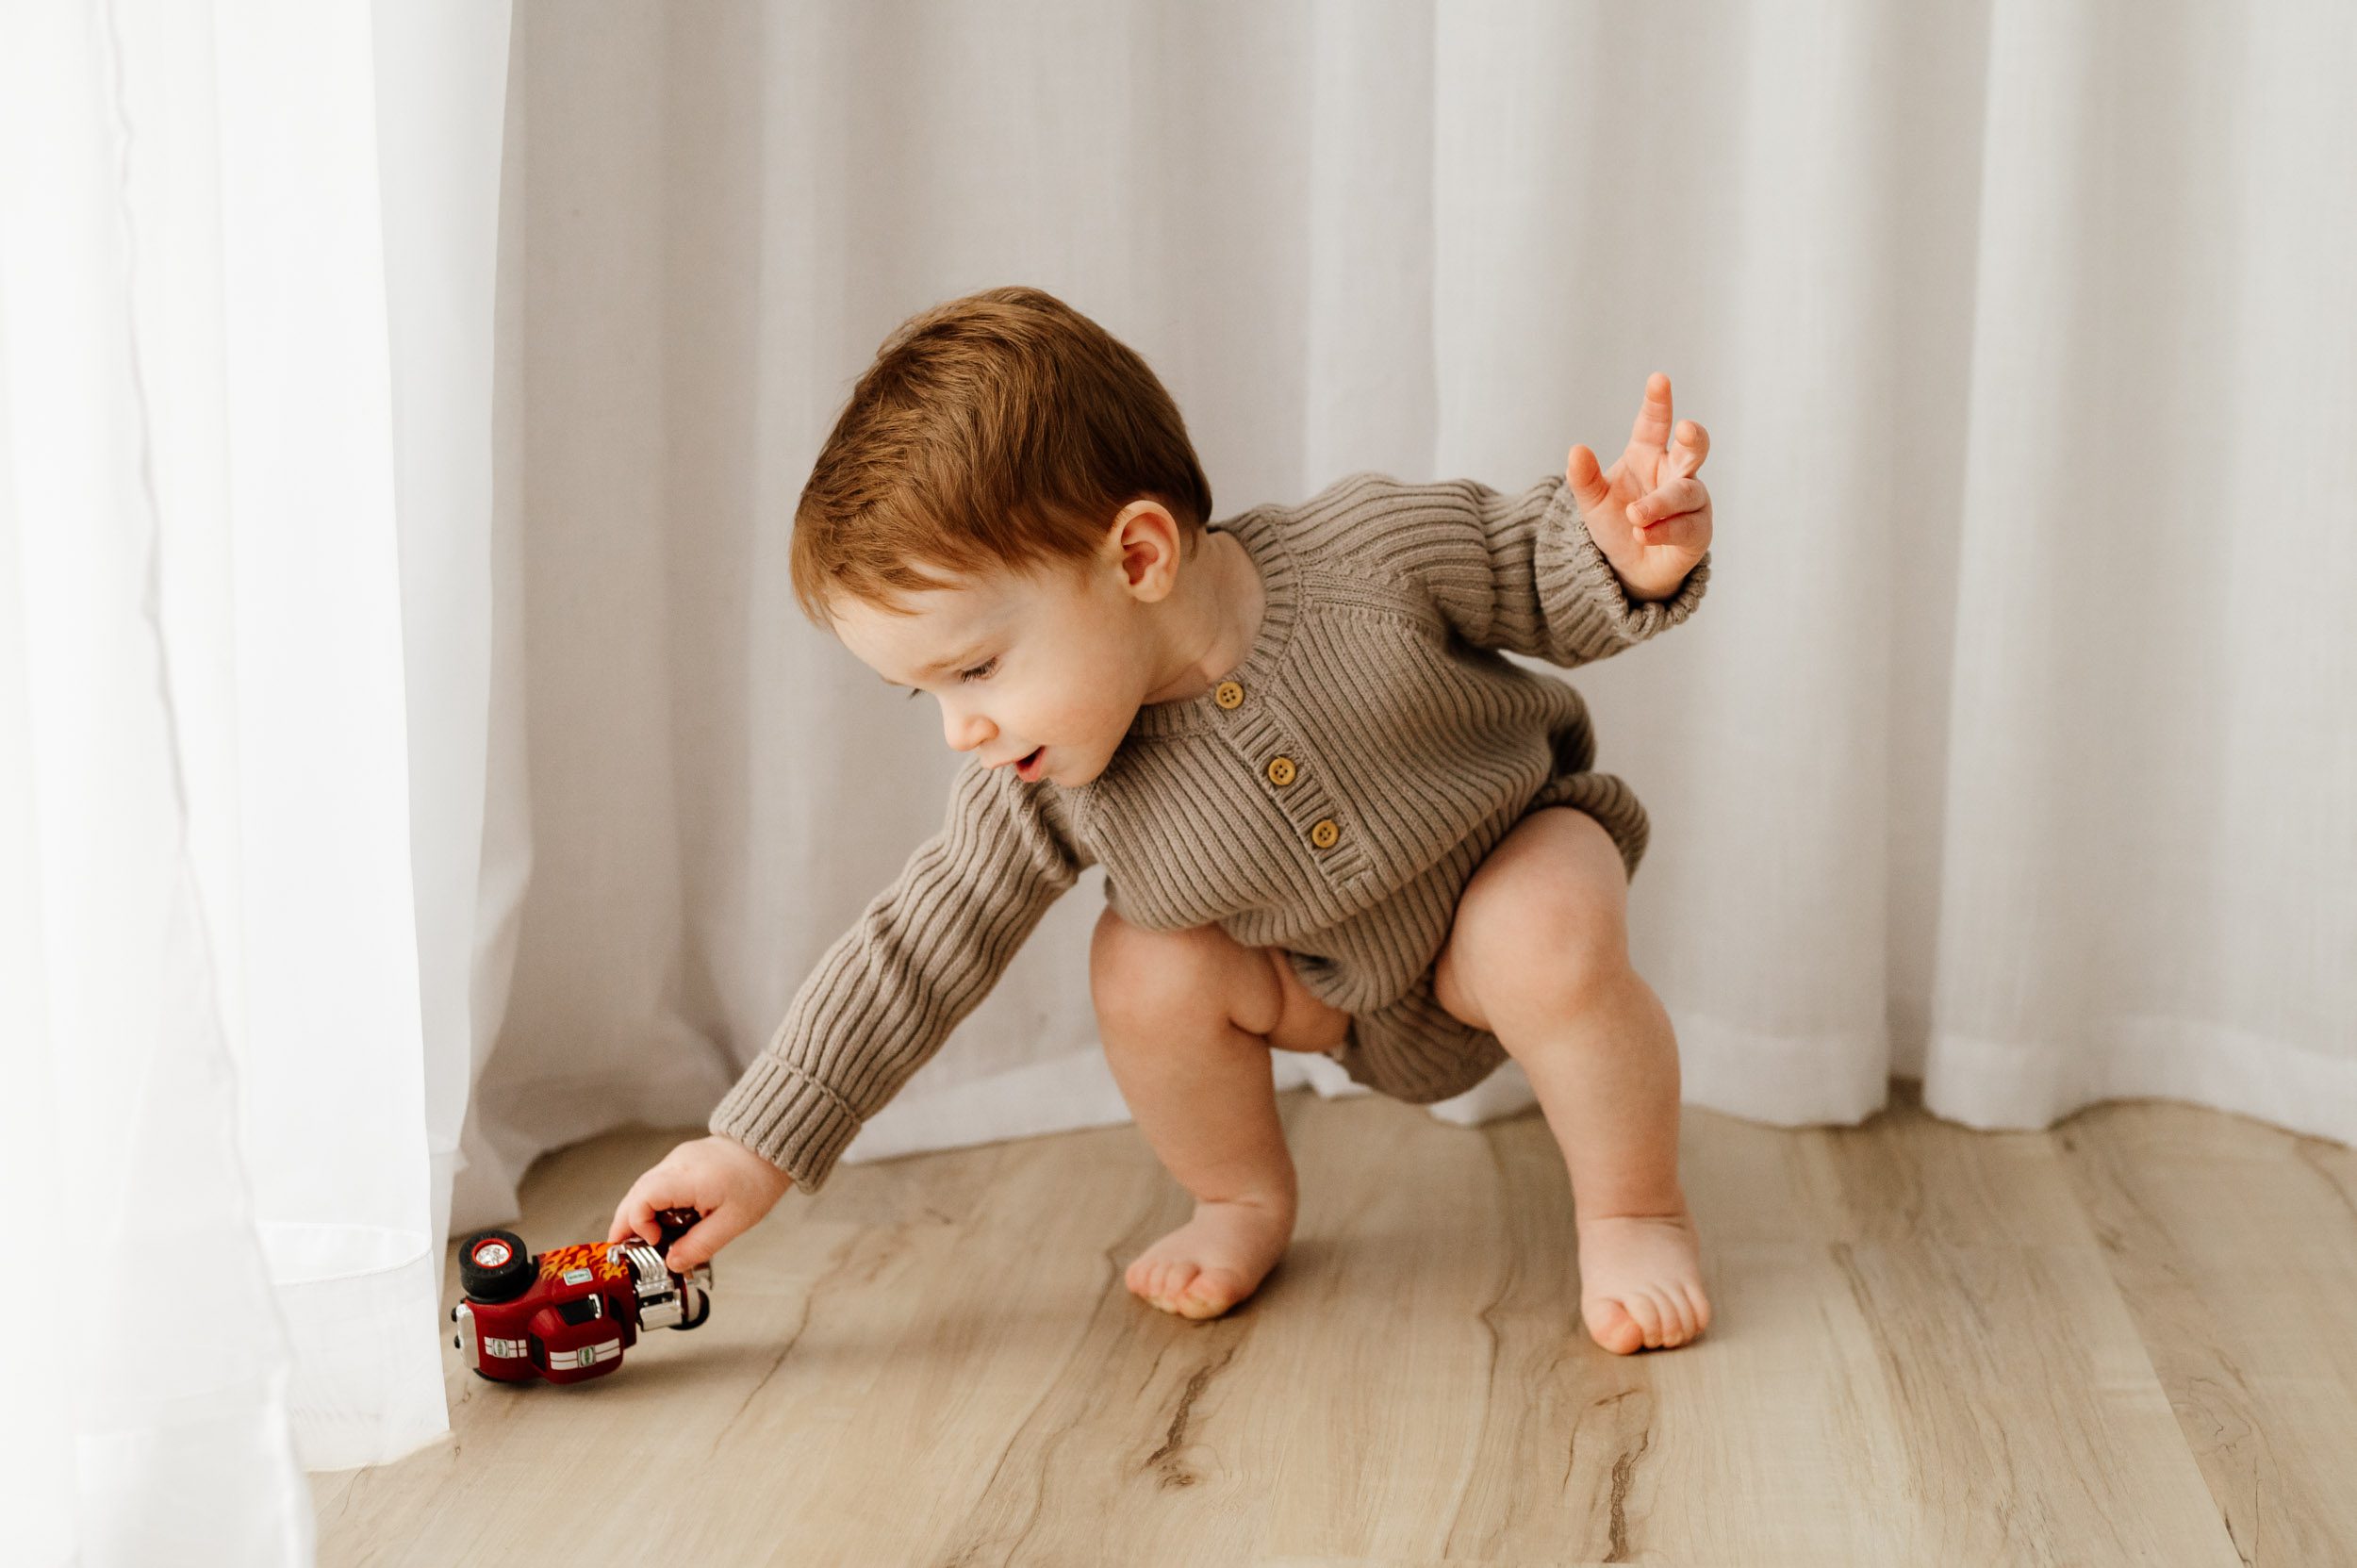 a young boy squatting down and reaching out to pick up his toy truck during a toddler milestone photoshoot